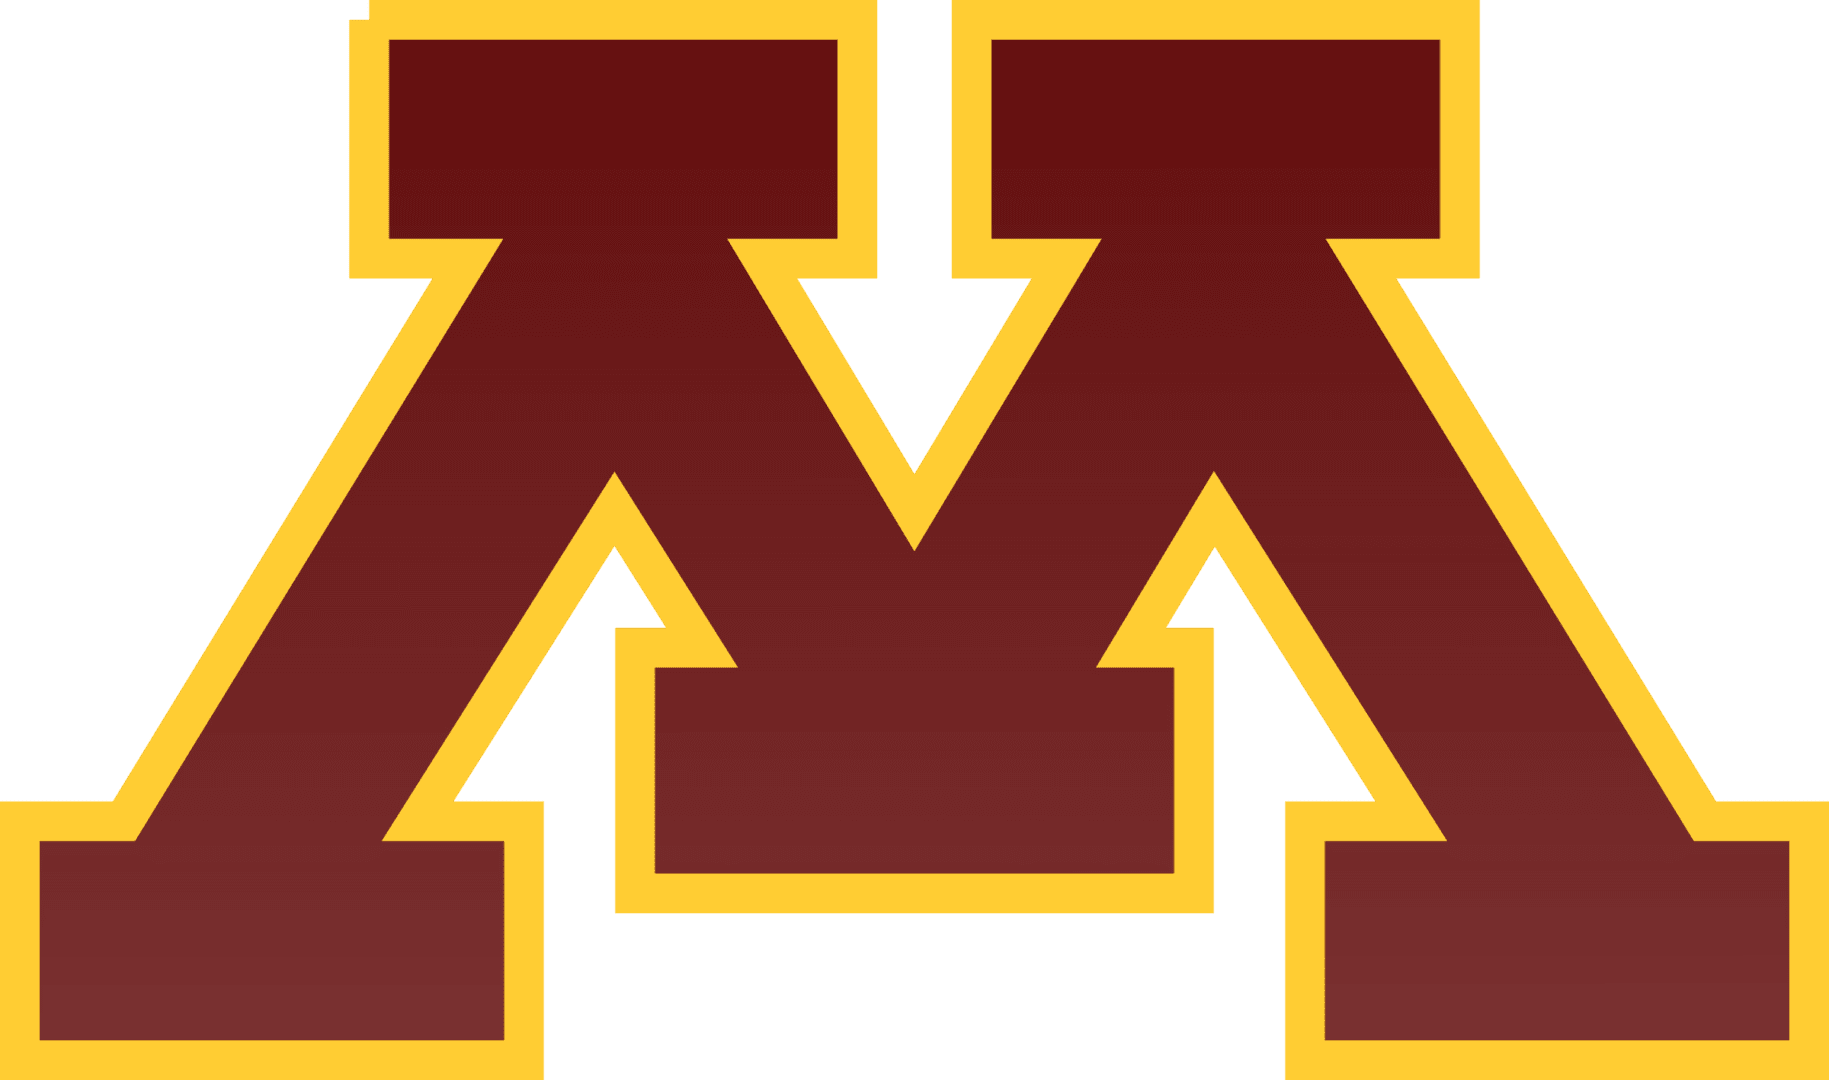 Minnesota Golden Gophers logo featuring Athletic Solutions.